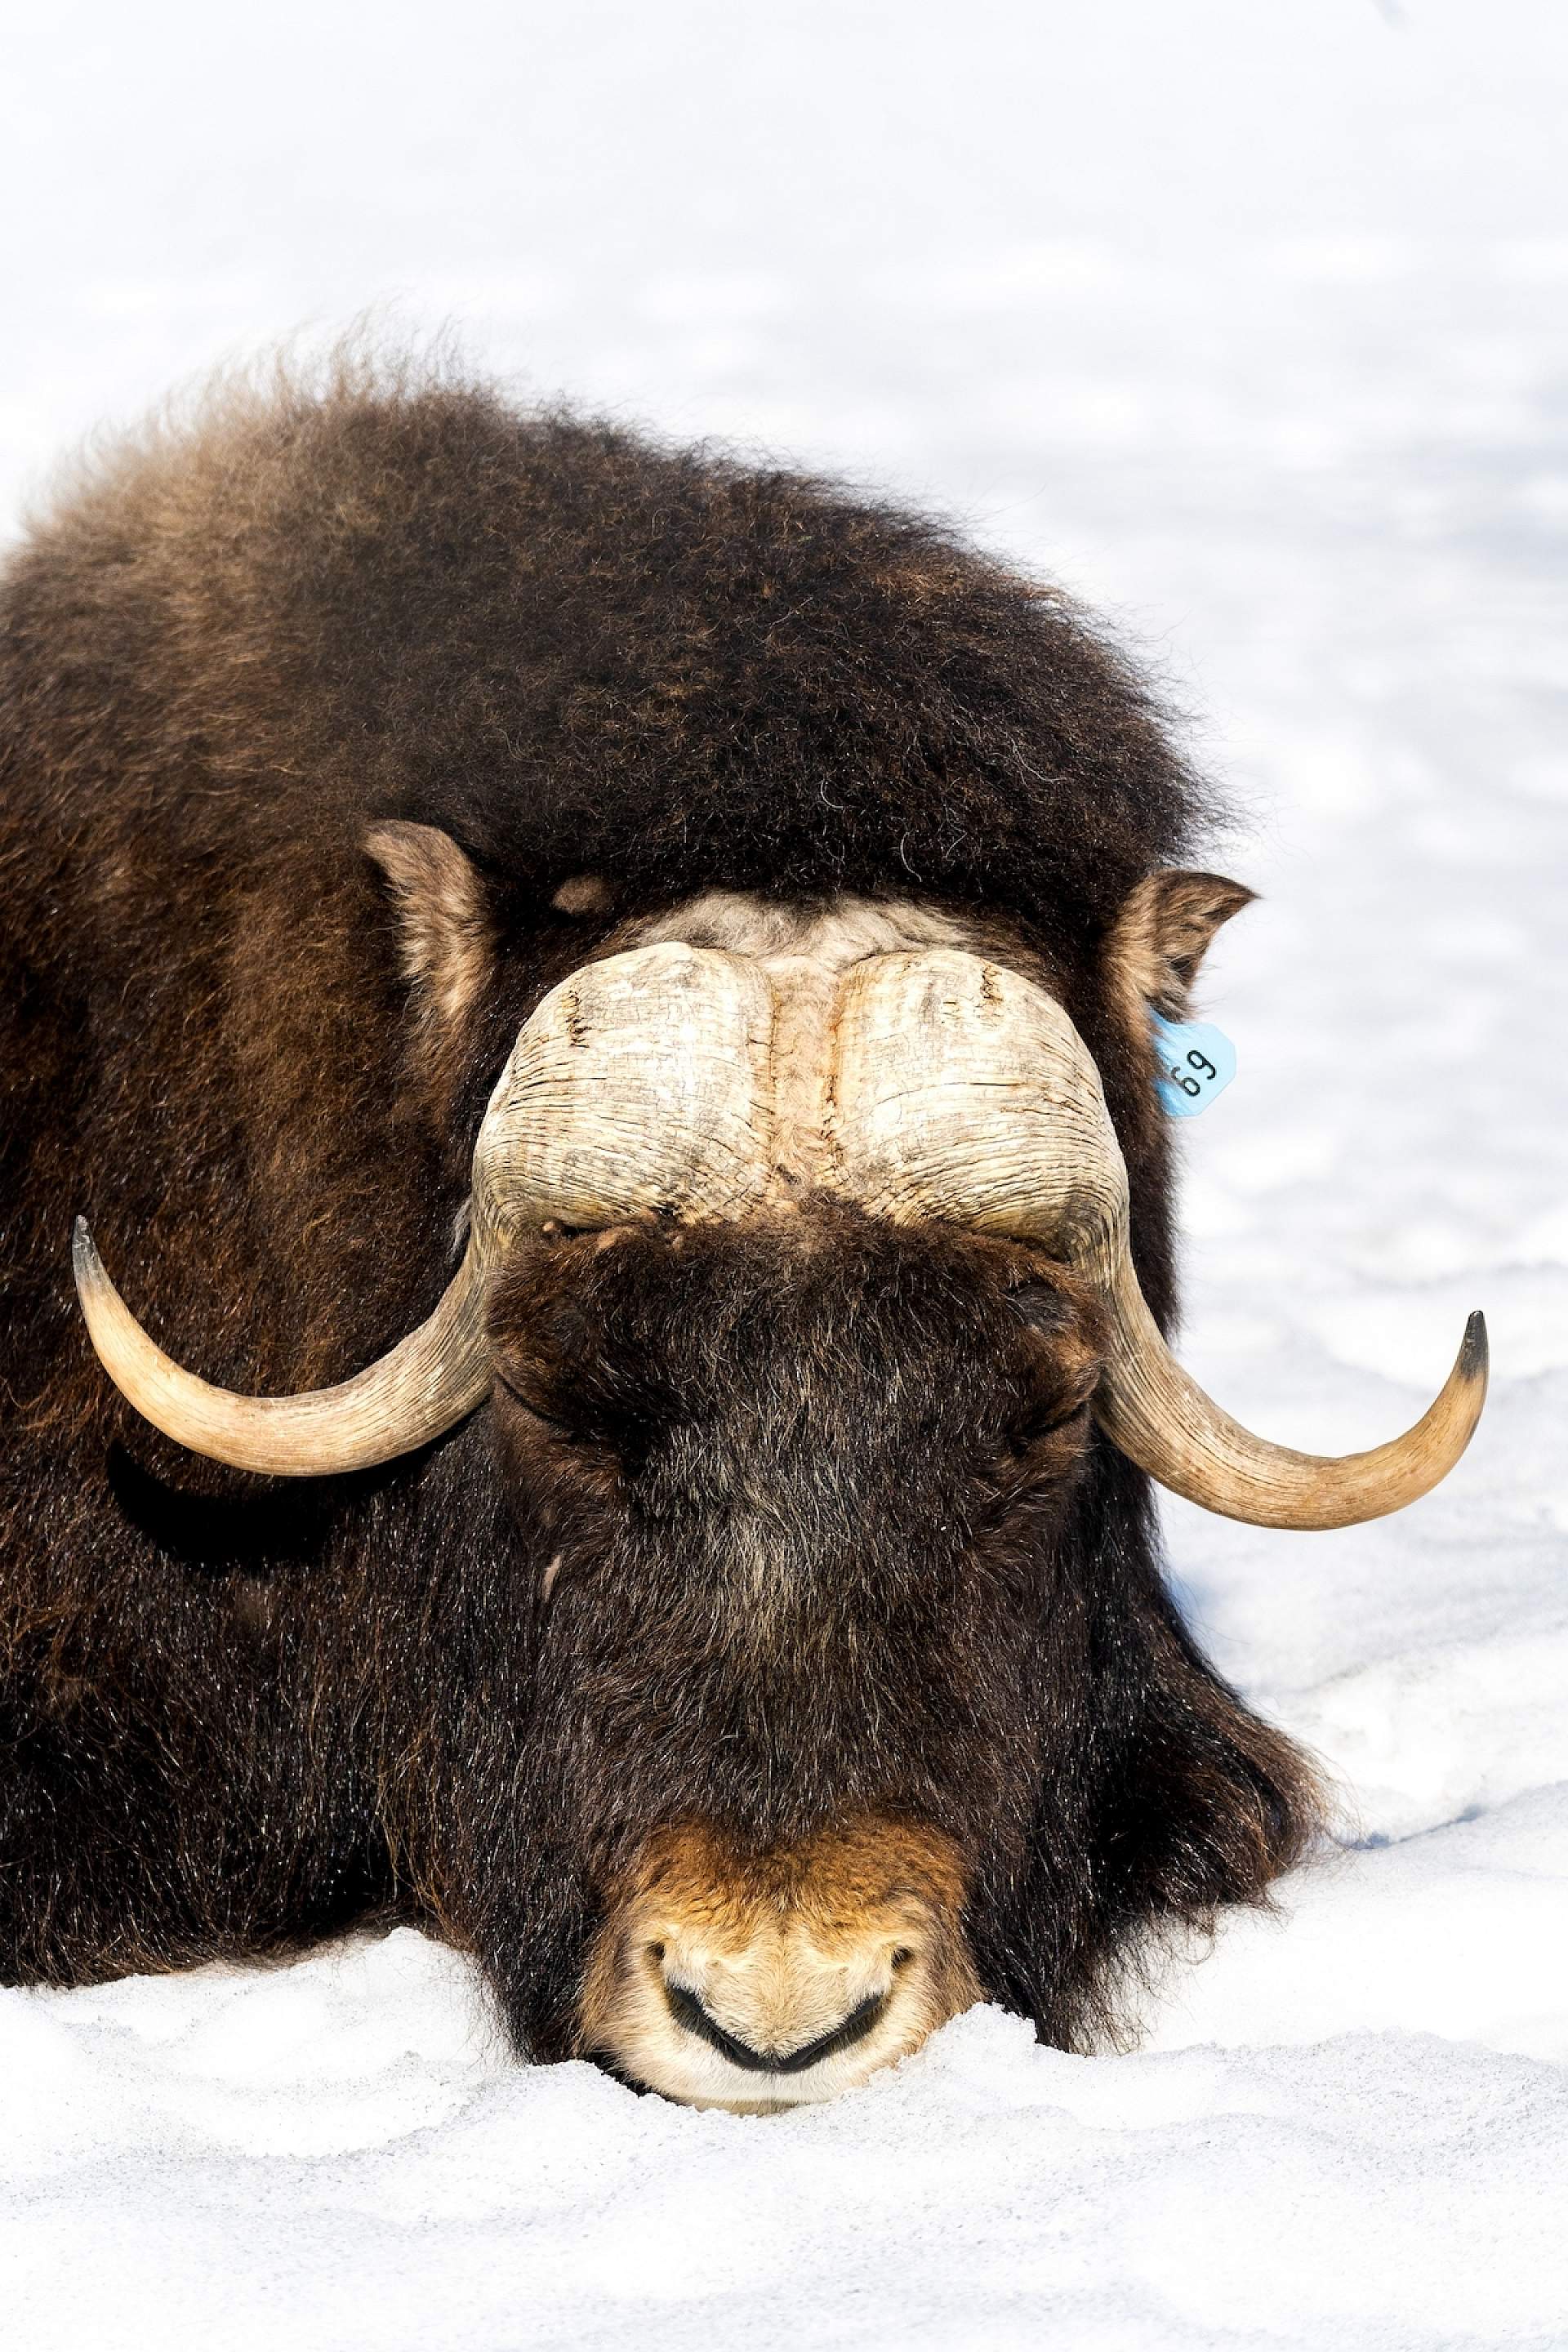 A musk ox sleeps in the snow at the Alaska Wildlife Conservation Center.